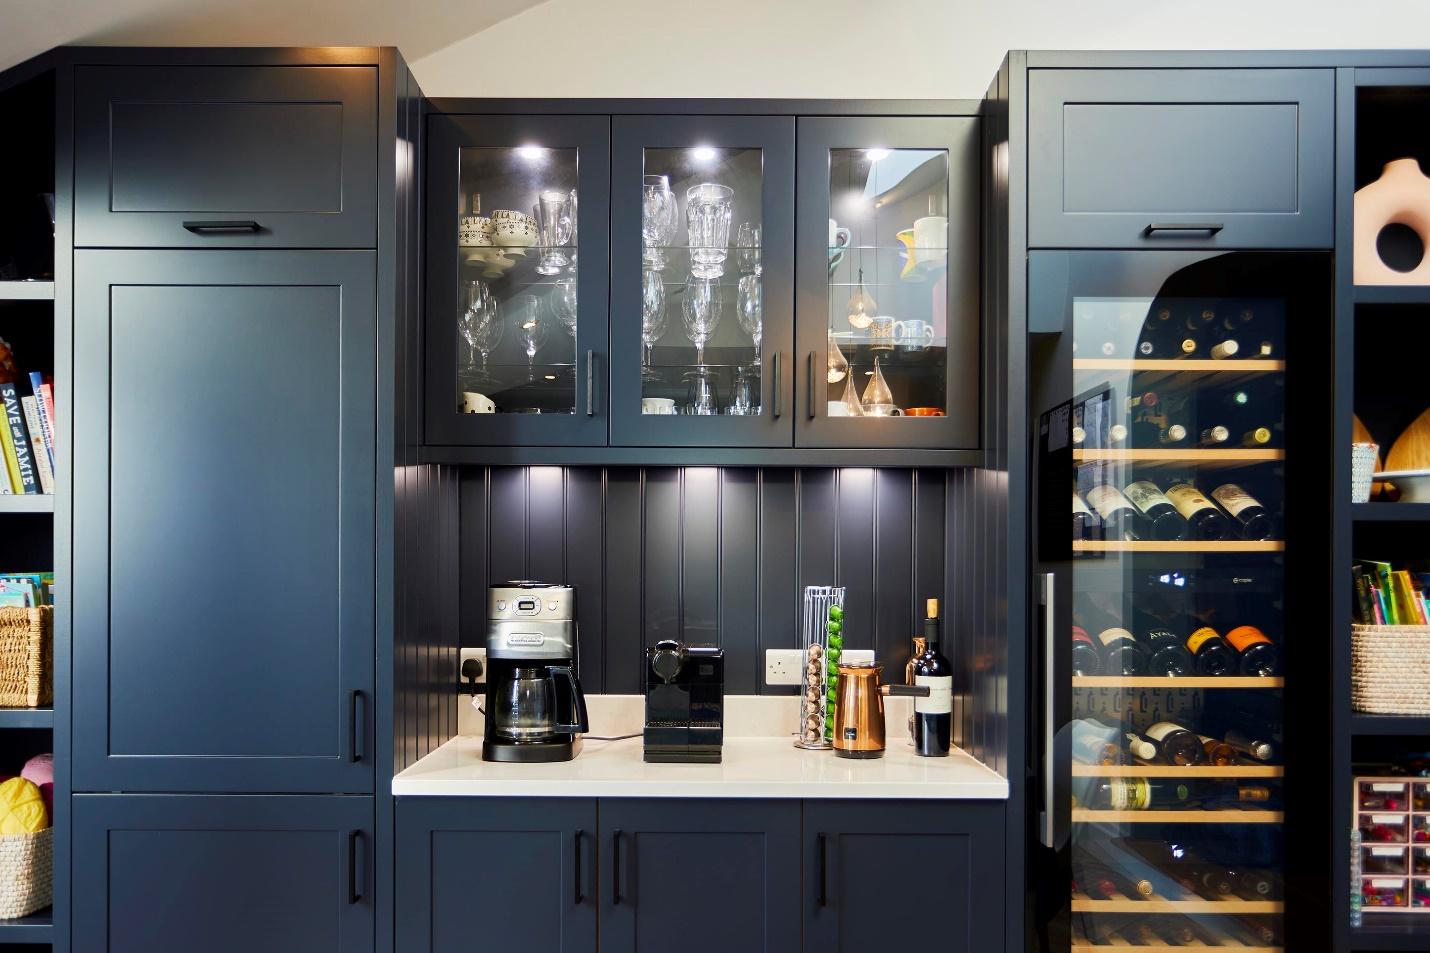 A kitchen with a wine fridge and a coffee maker

Description automatically generated